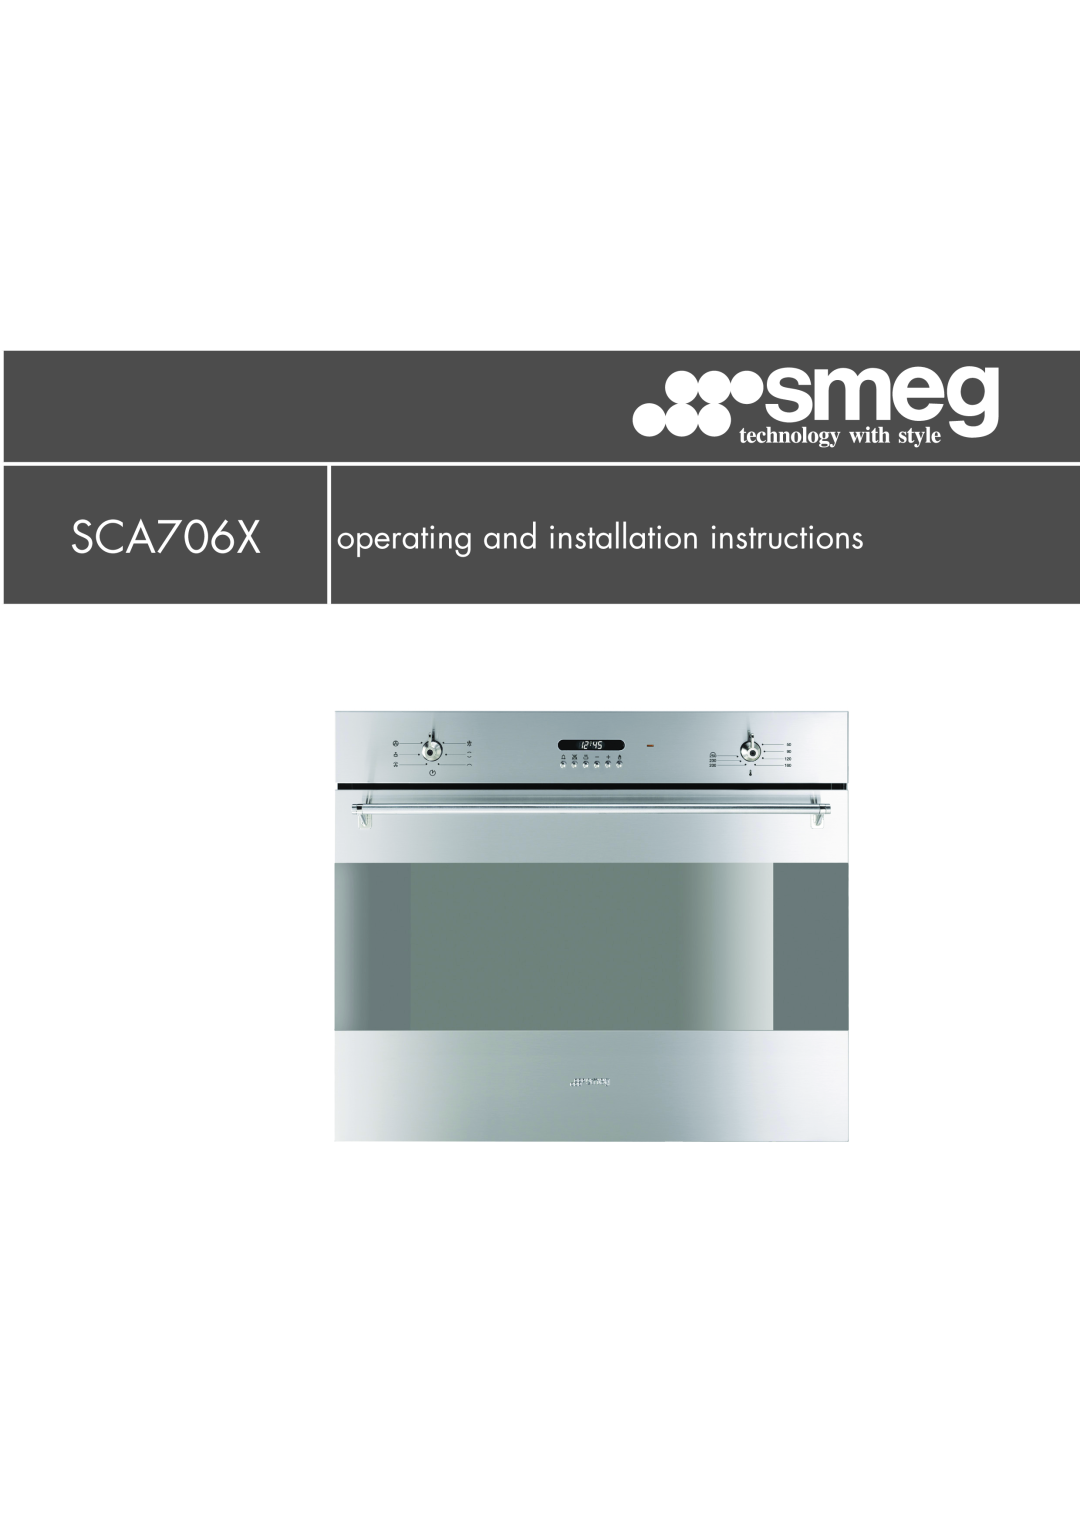 Smeg SCA706X, Smeg Electric Wall Oven manual operating and installation instructions 